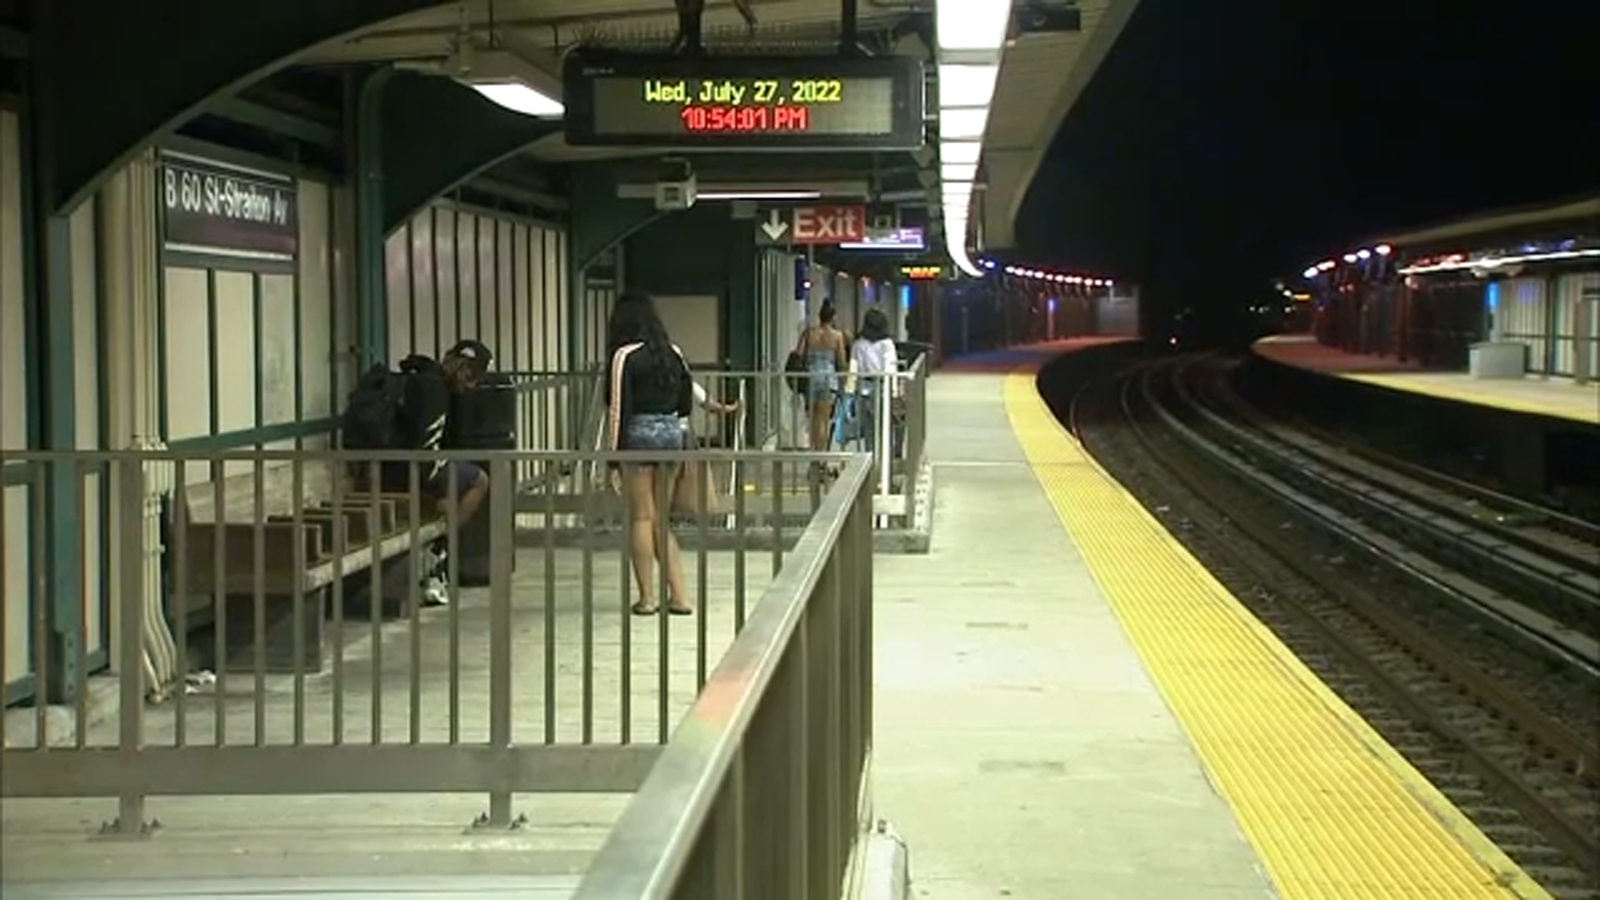 18-year-old man shot in leg while riding subway train in Queens